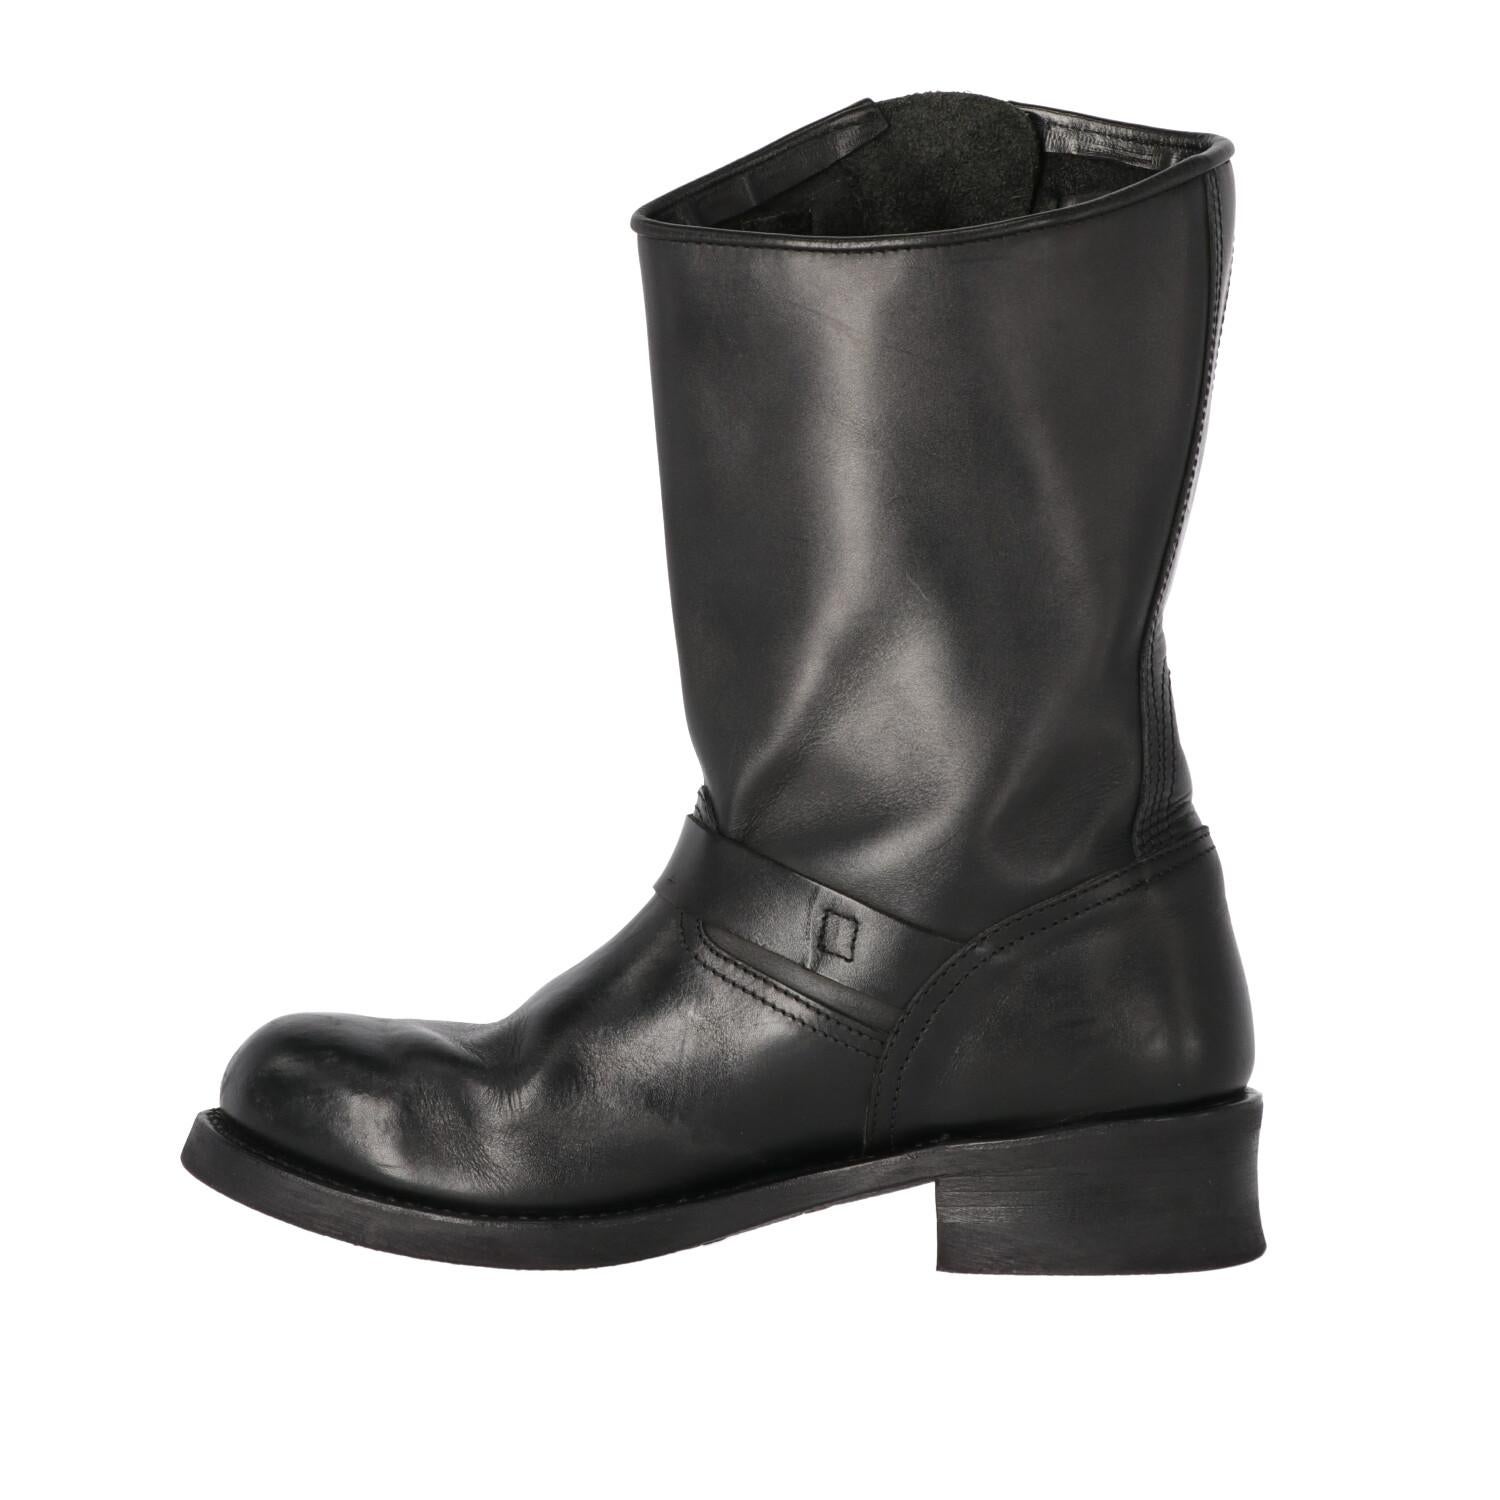 Harley Davidson black genuine leather biker boots, featuring straps with metal holes and logoed metal buckles, embroidered brand name on the heel and round toe.

Item shows light signs of wear on the leather, as shown in the pictures. 
Years: